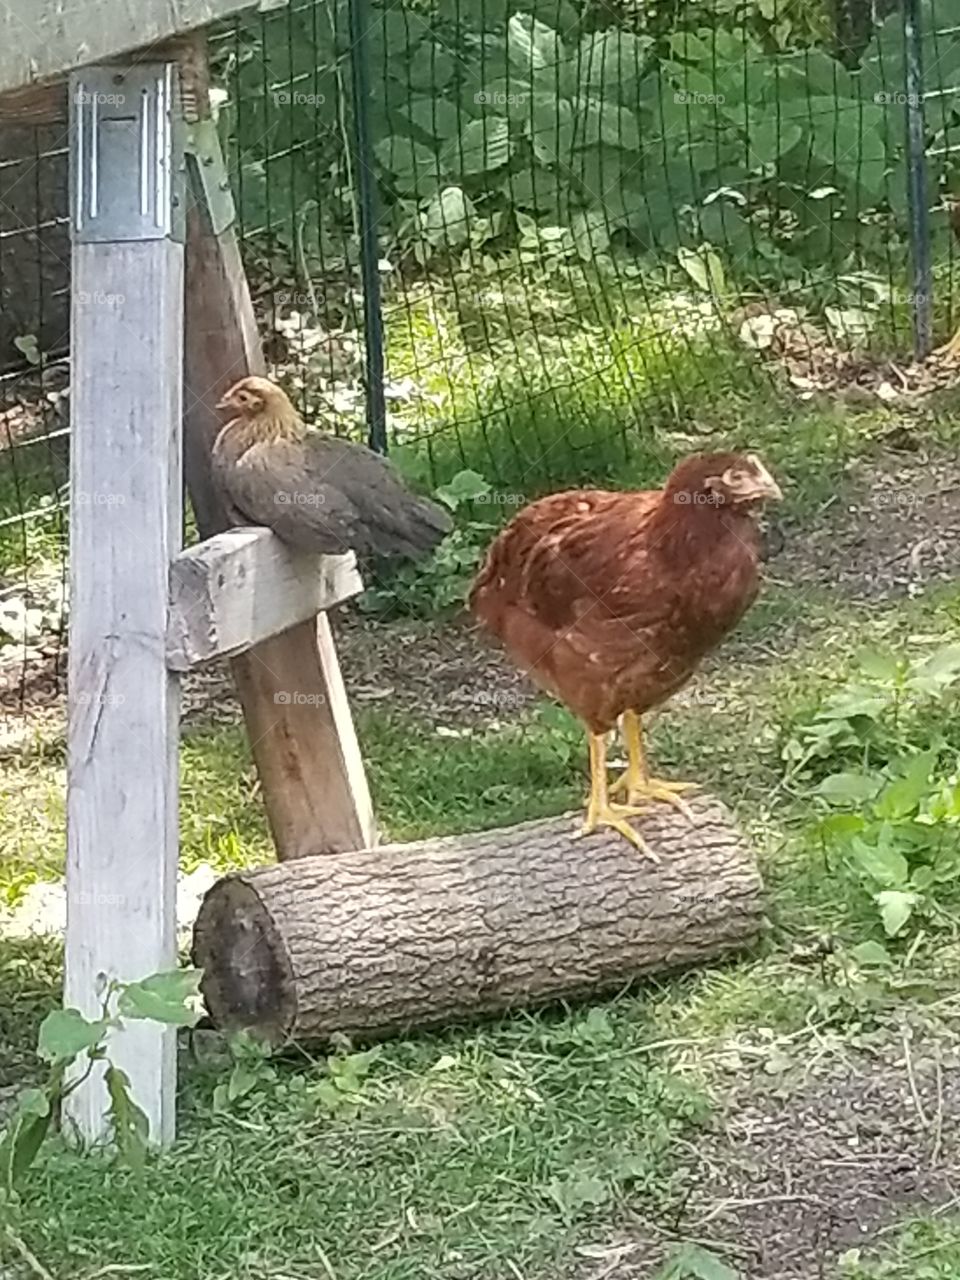 Two Chicks